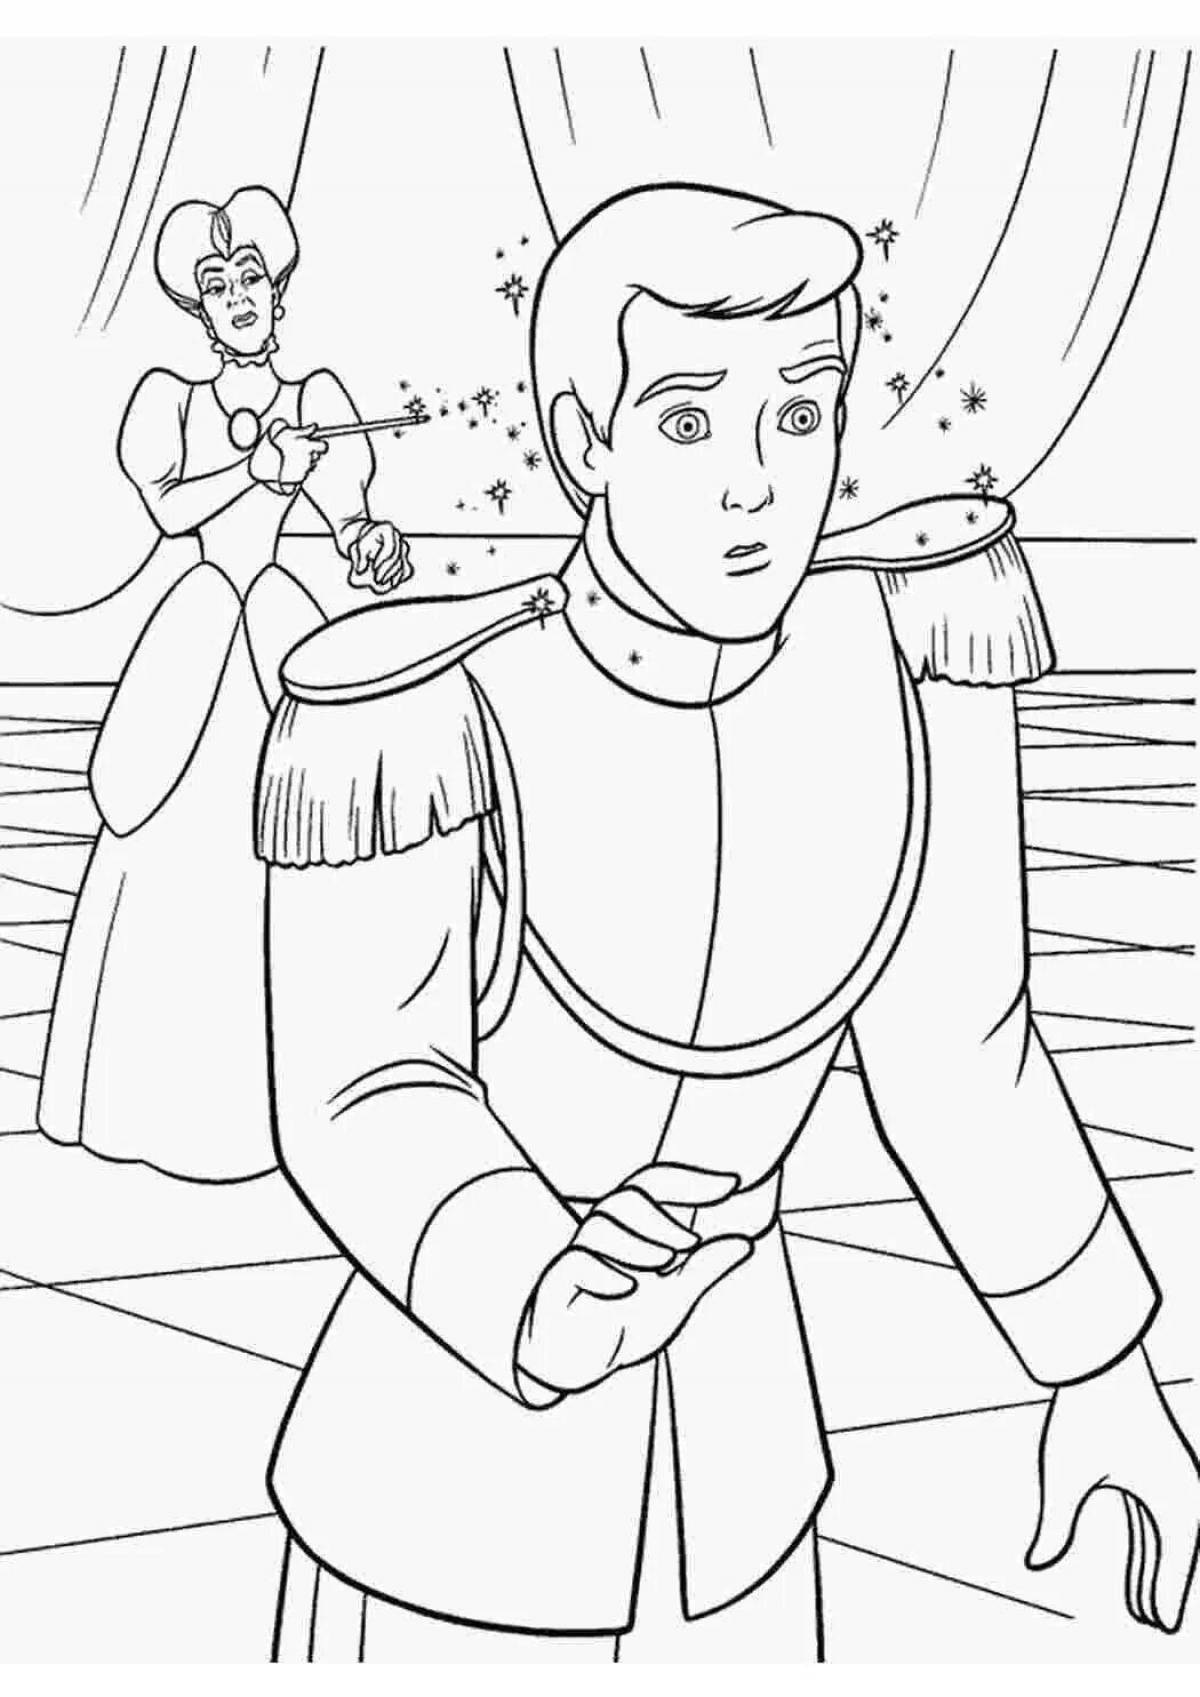 The living prince coloring pages for kids